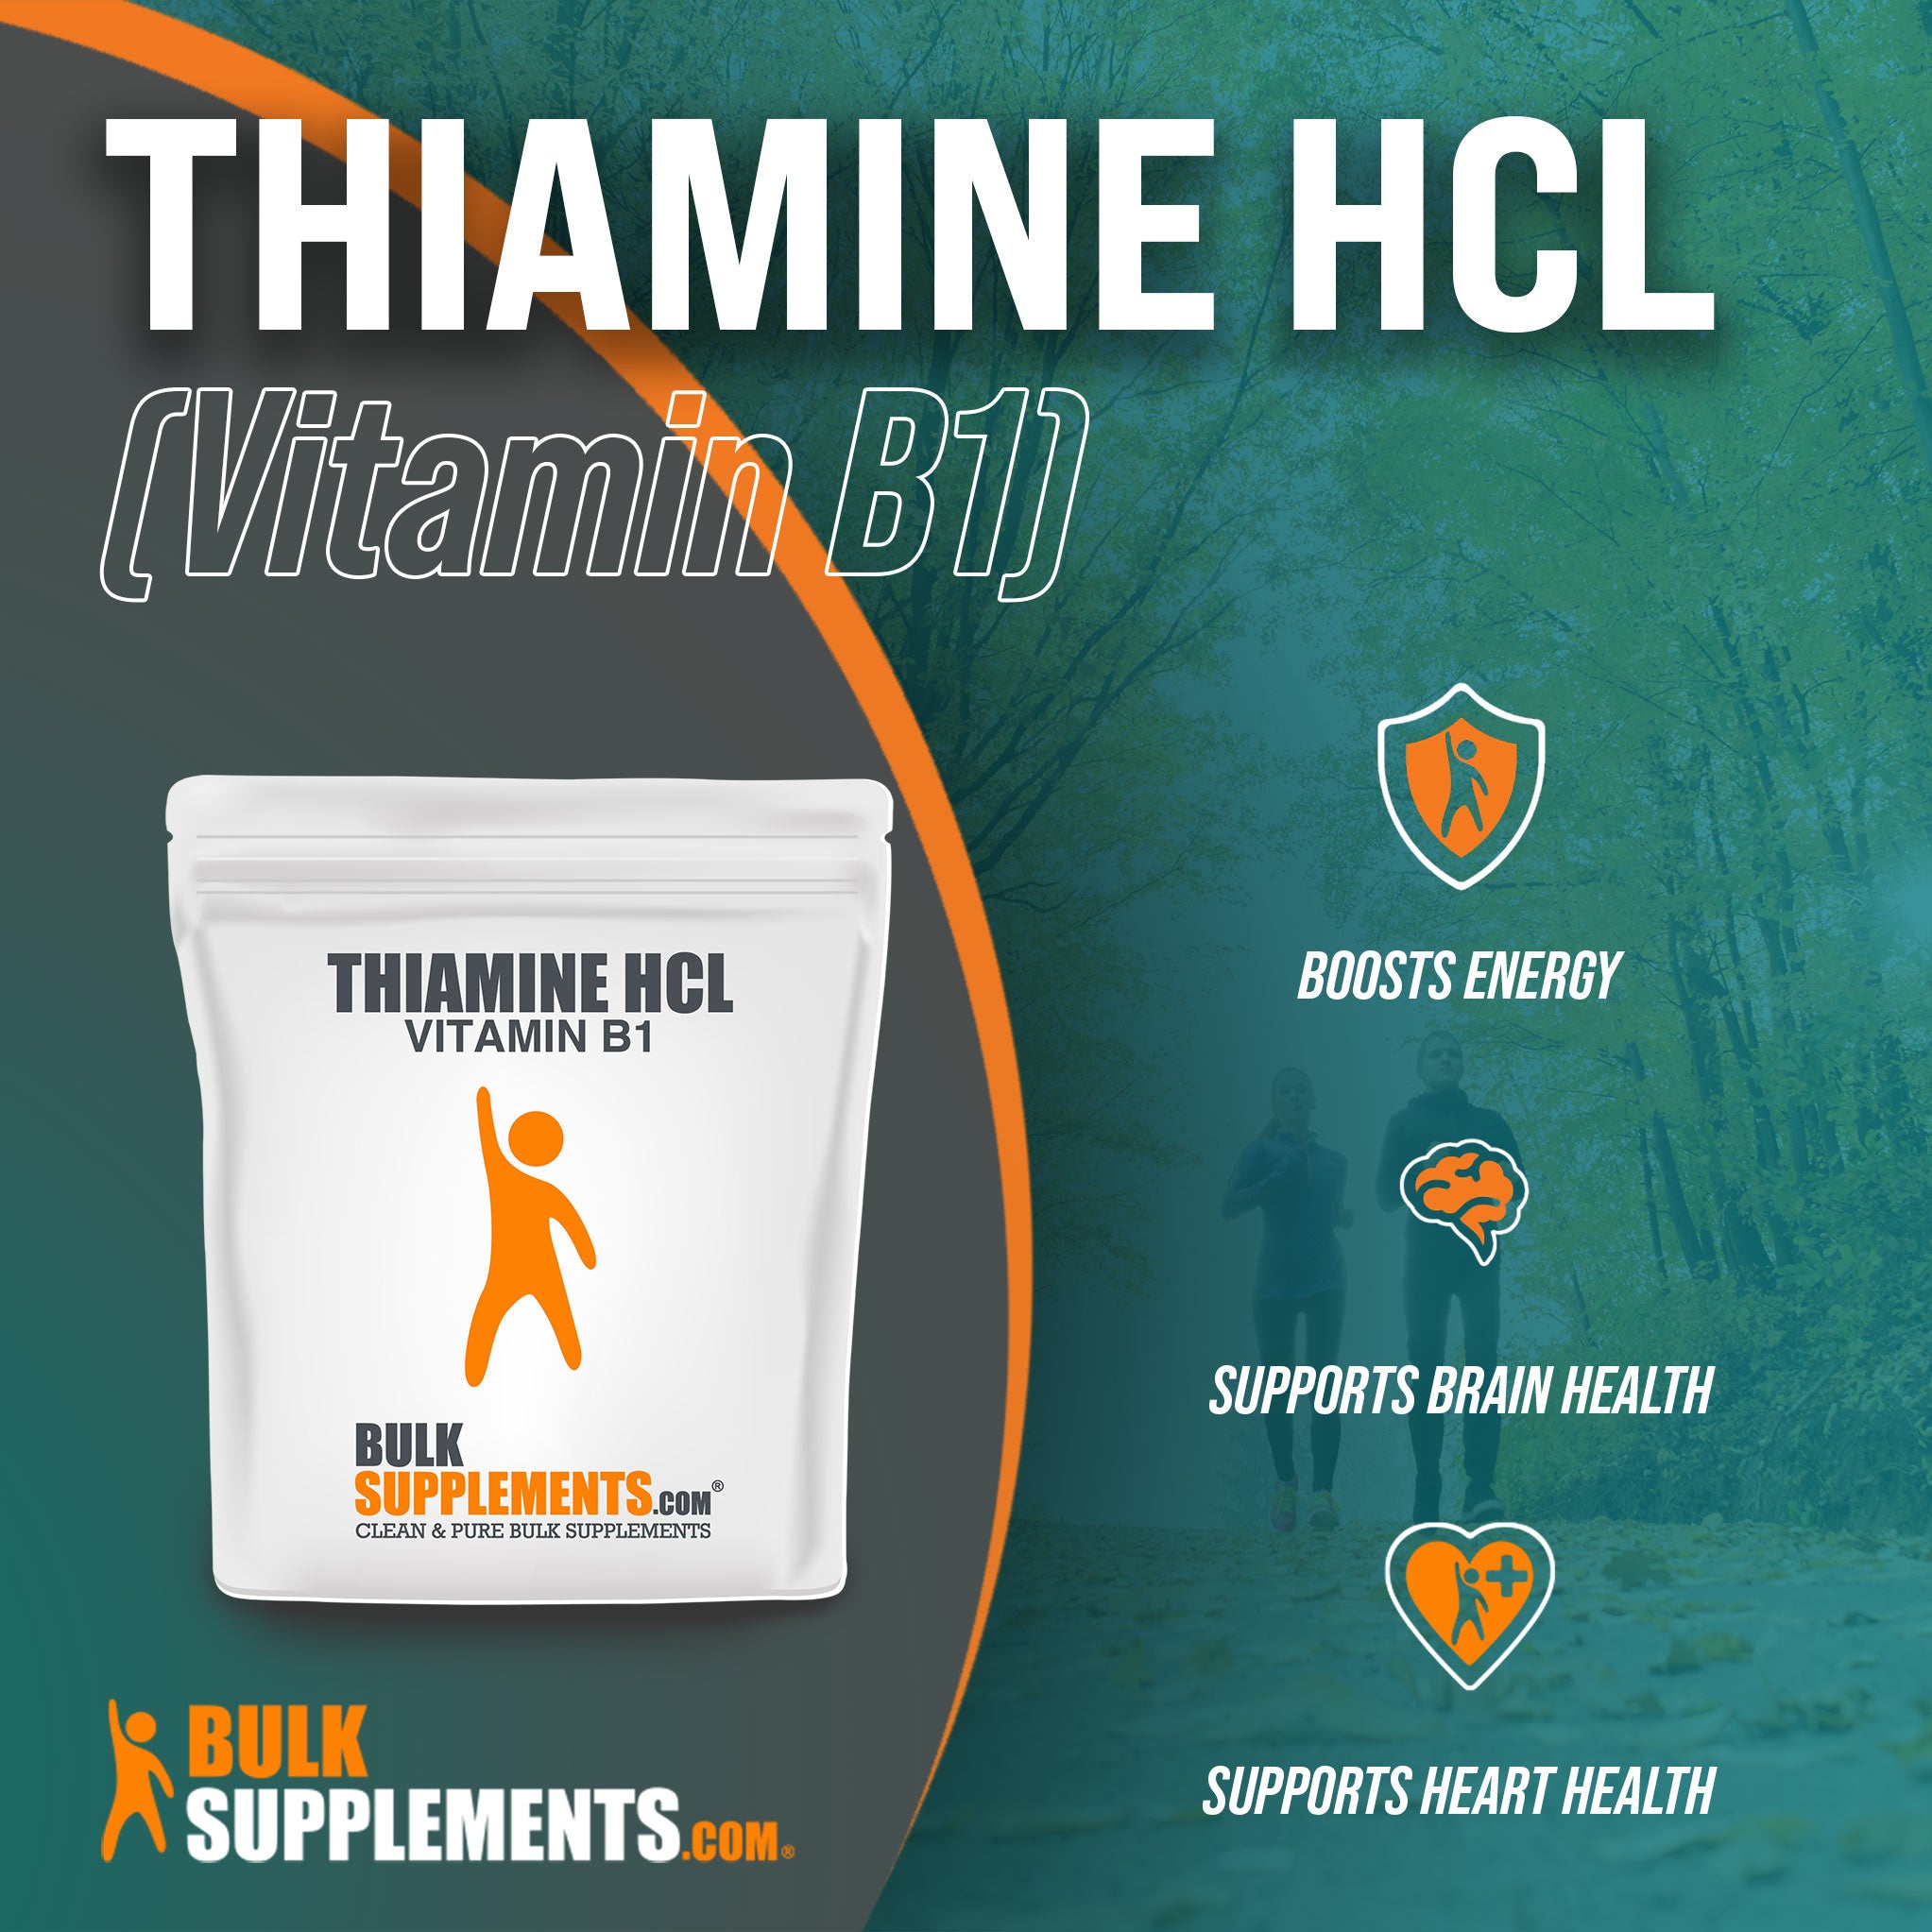 Benefits of Thiamine HCl Vitamin B1: boosts energy, supports brain health, supports heart health